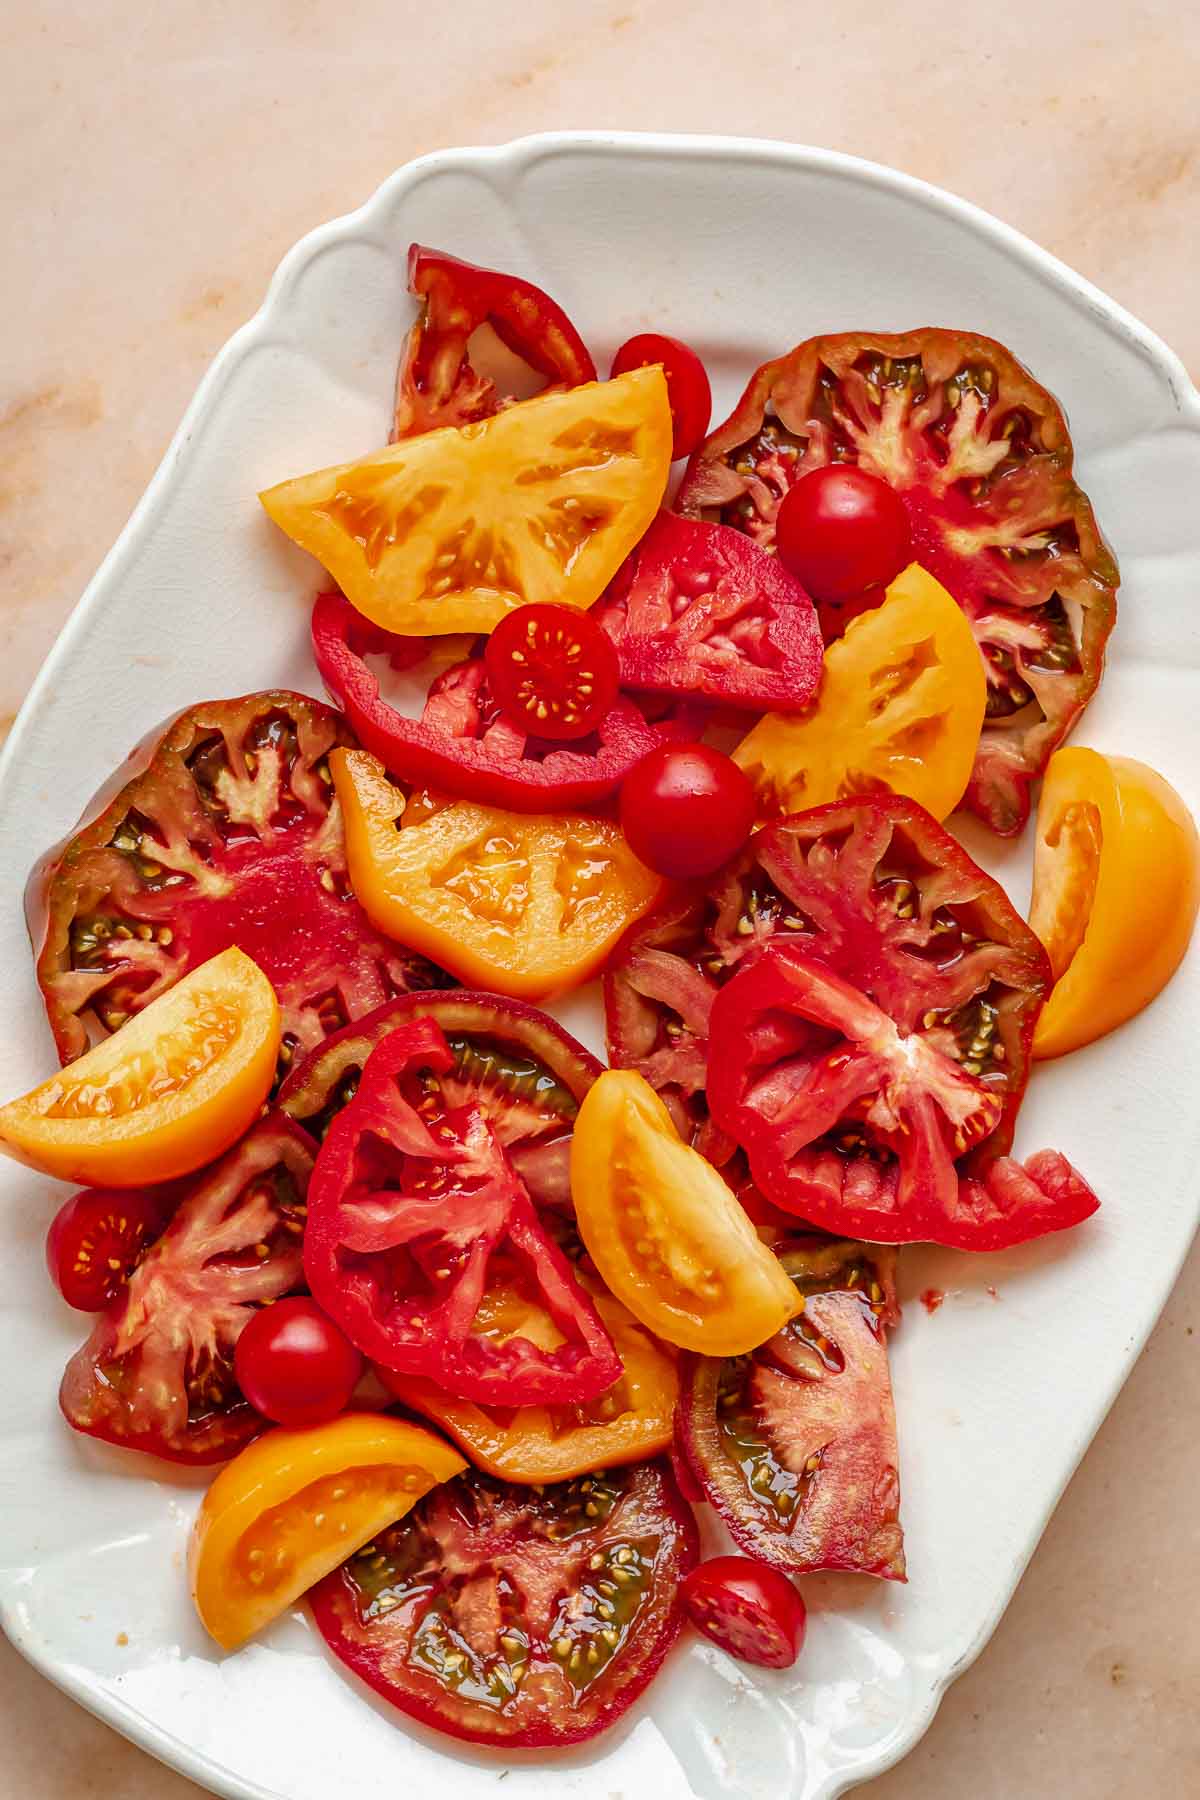 Sliced tomatoes arranged on a platter.